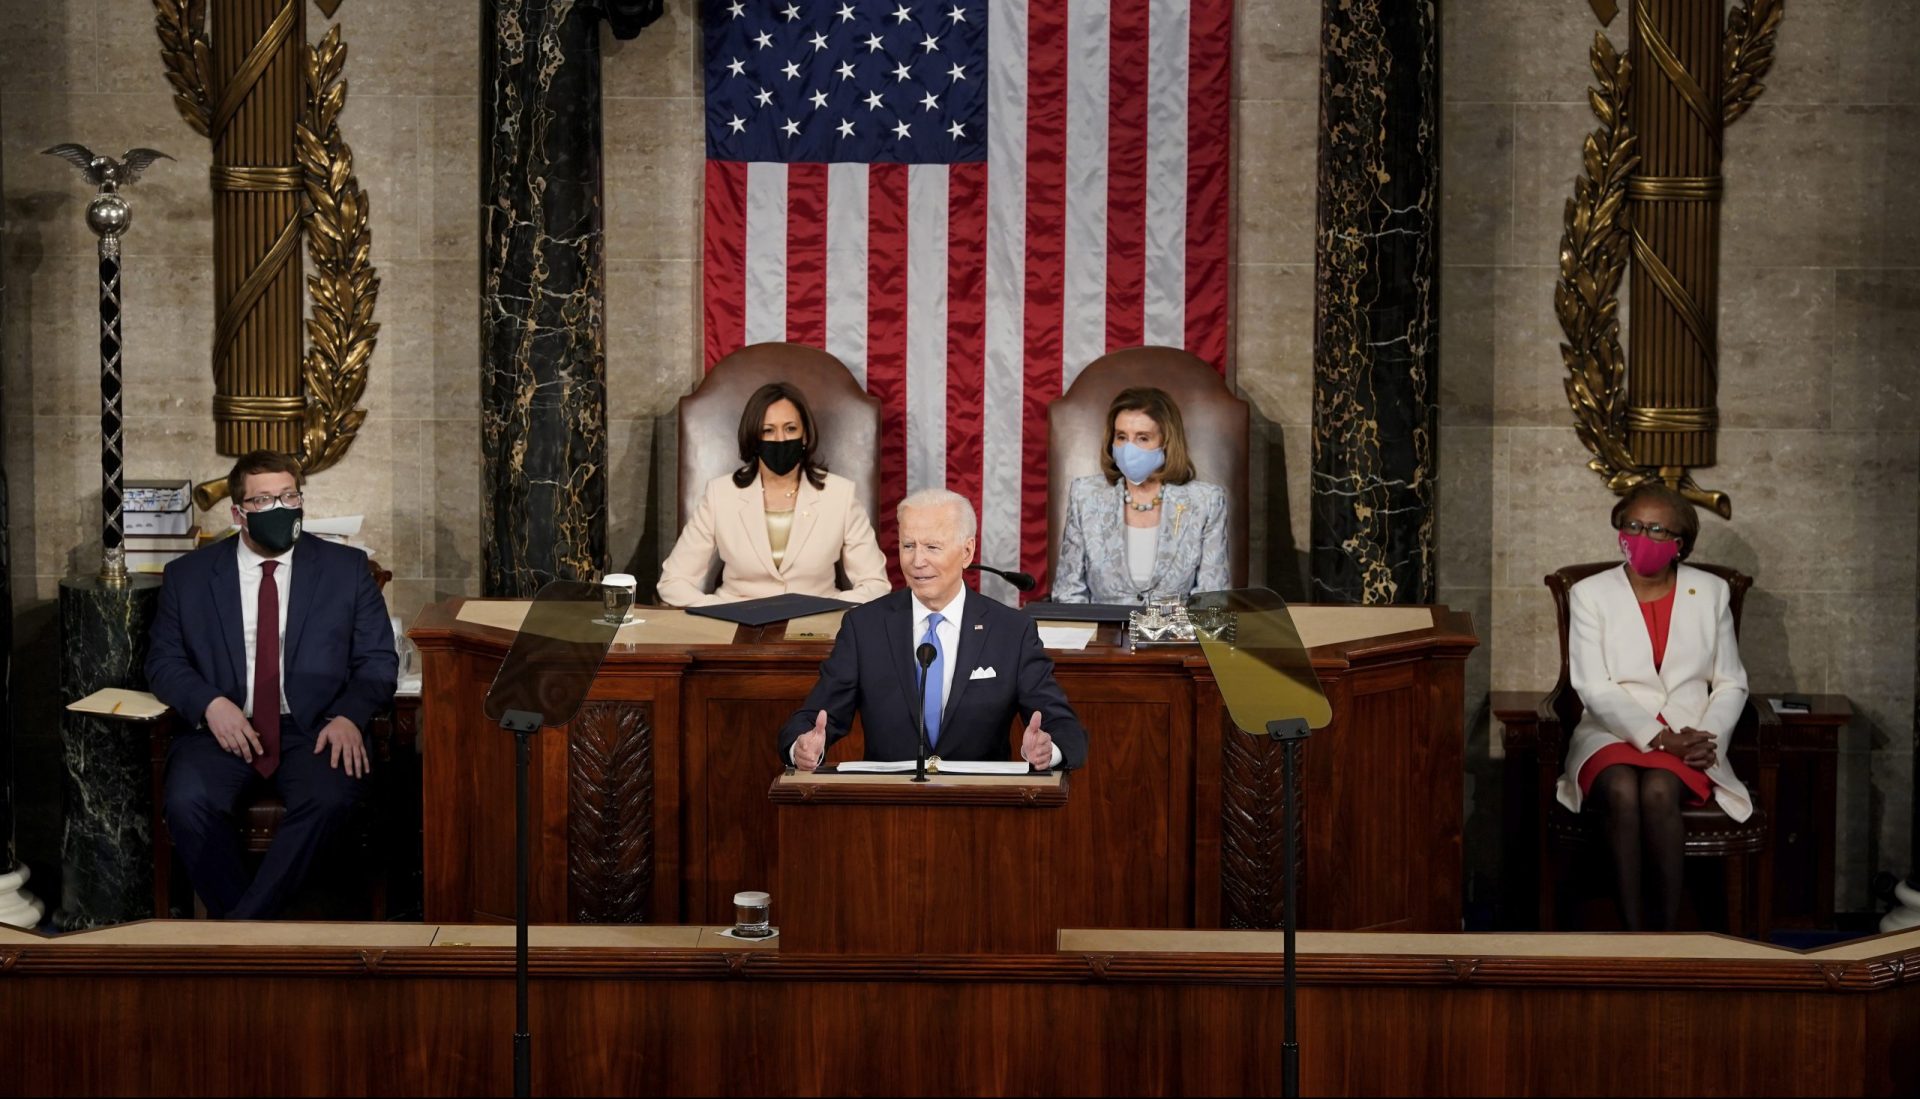 President Joe Biden speaks to a joint session of Congress Wednesday, April 28, 2021, in the House Chamber at the U.S. Capitol in Washington, as Vice President Kamala Harris and House Speaker Nancy Pelosi of Calif., listen.